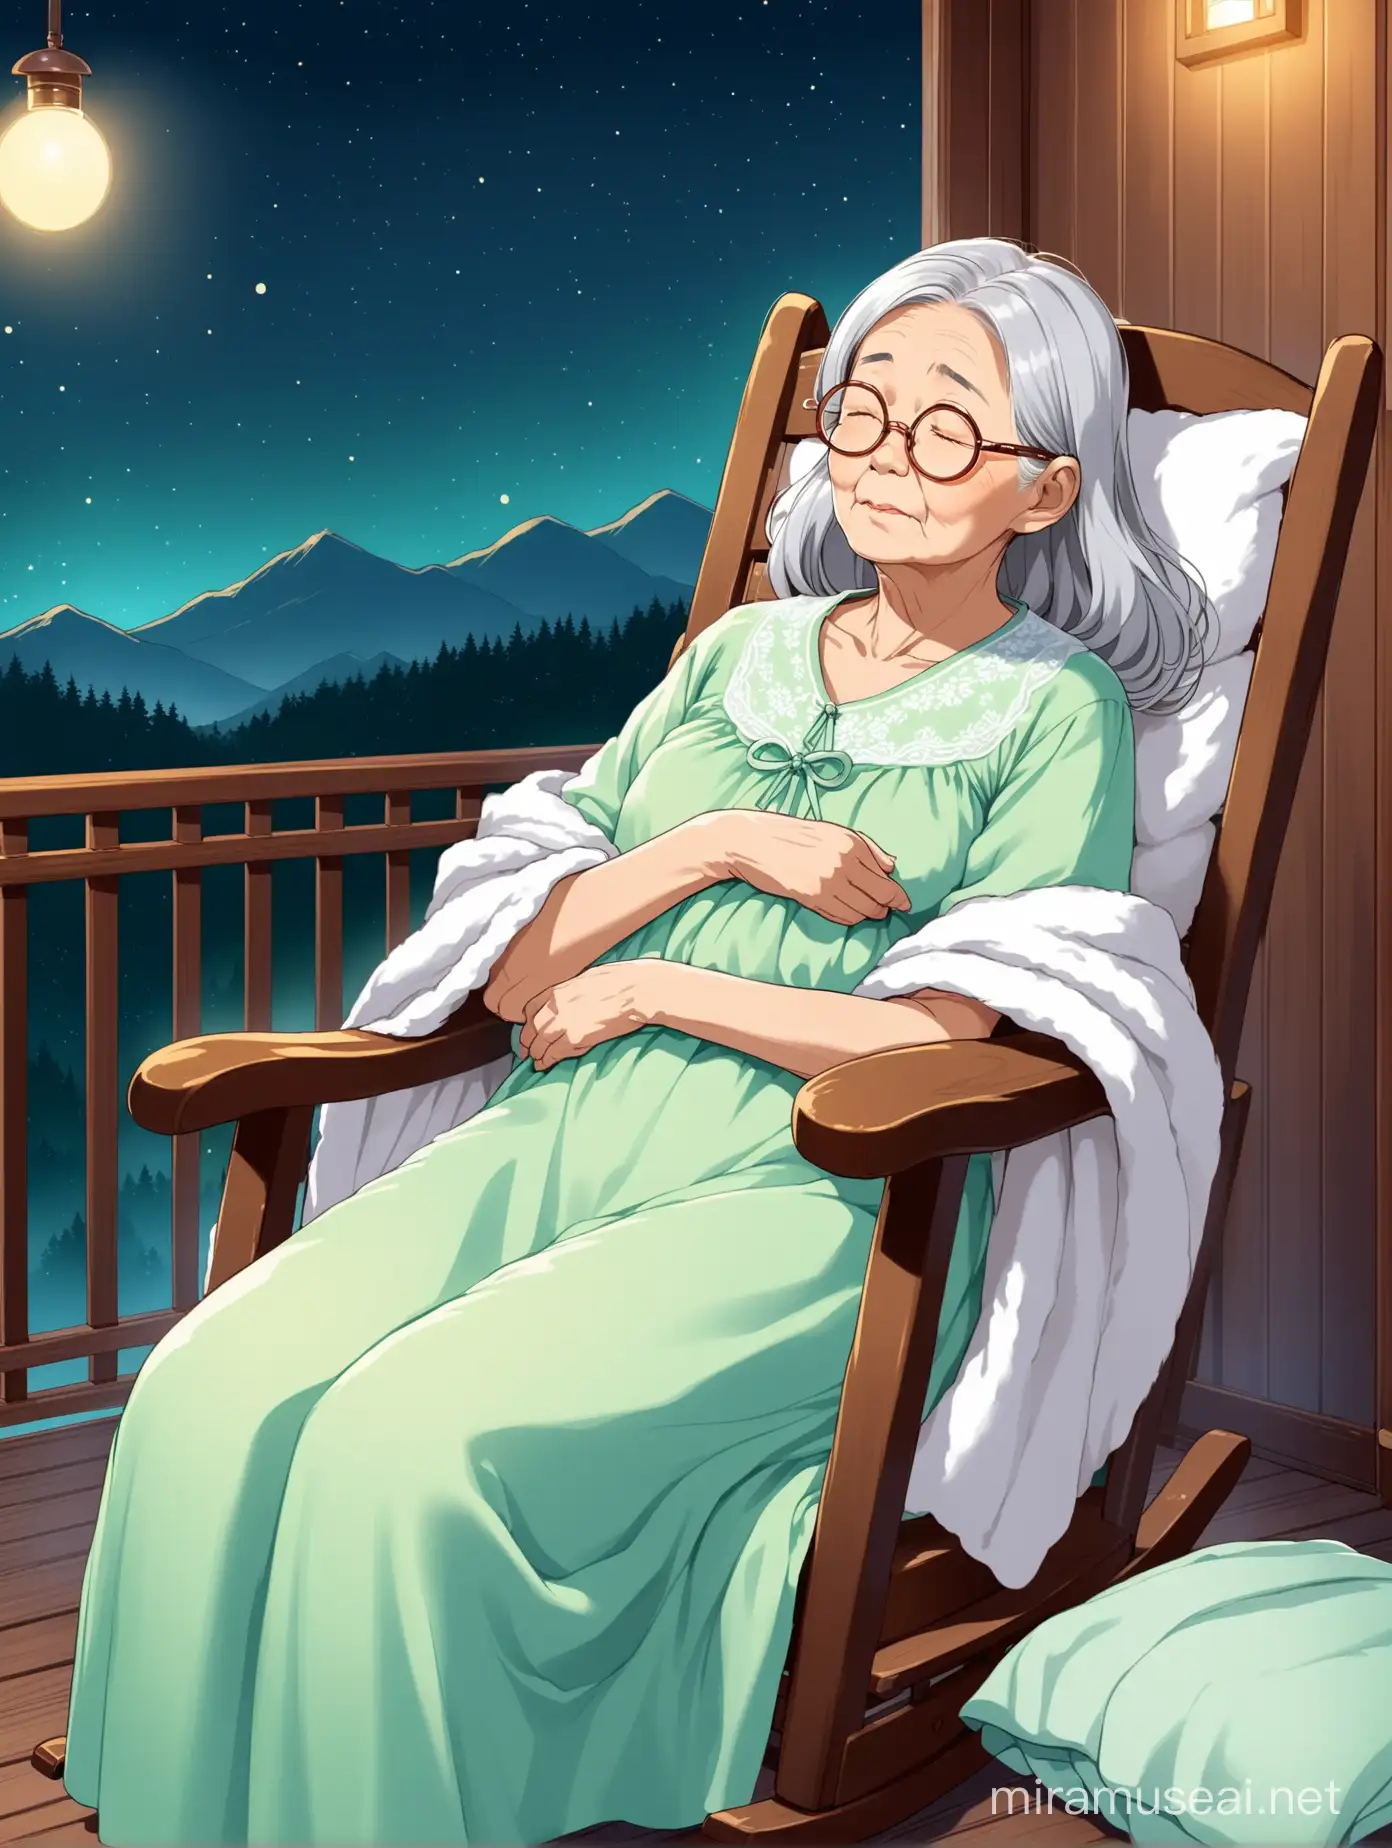 Elderly Asian woman, long gray hair, light green nightgown, round glasses, white shawl, on rocking chair, with blanket, sleeping, eyes closed, snoring, inside cabin, night time.